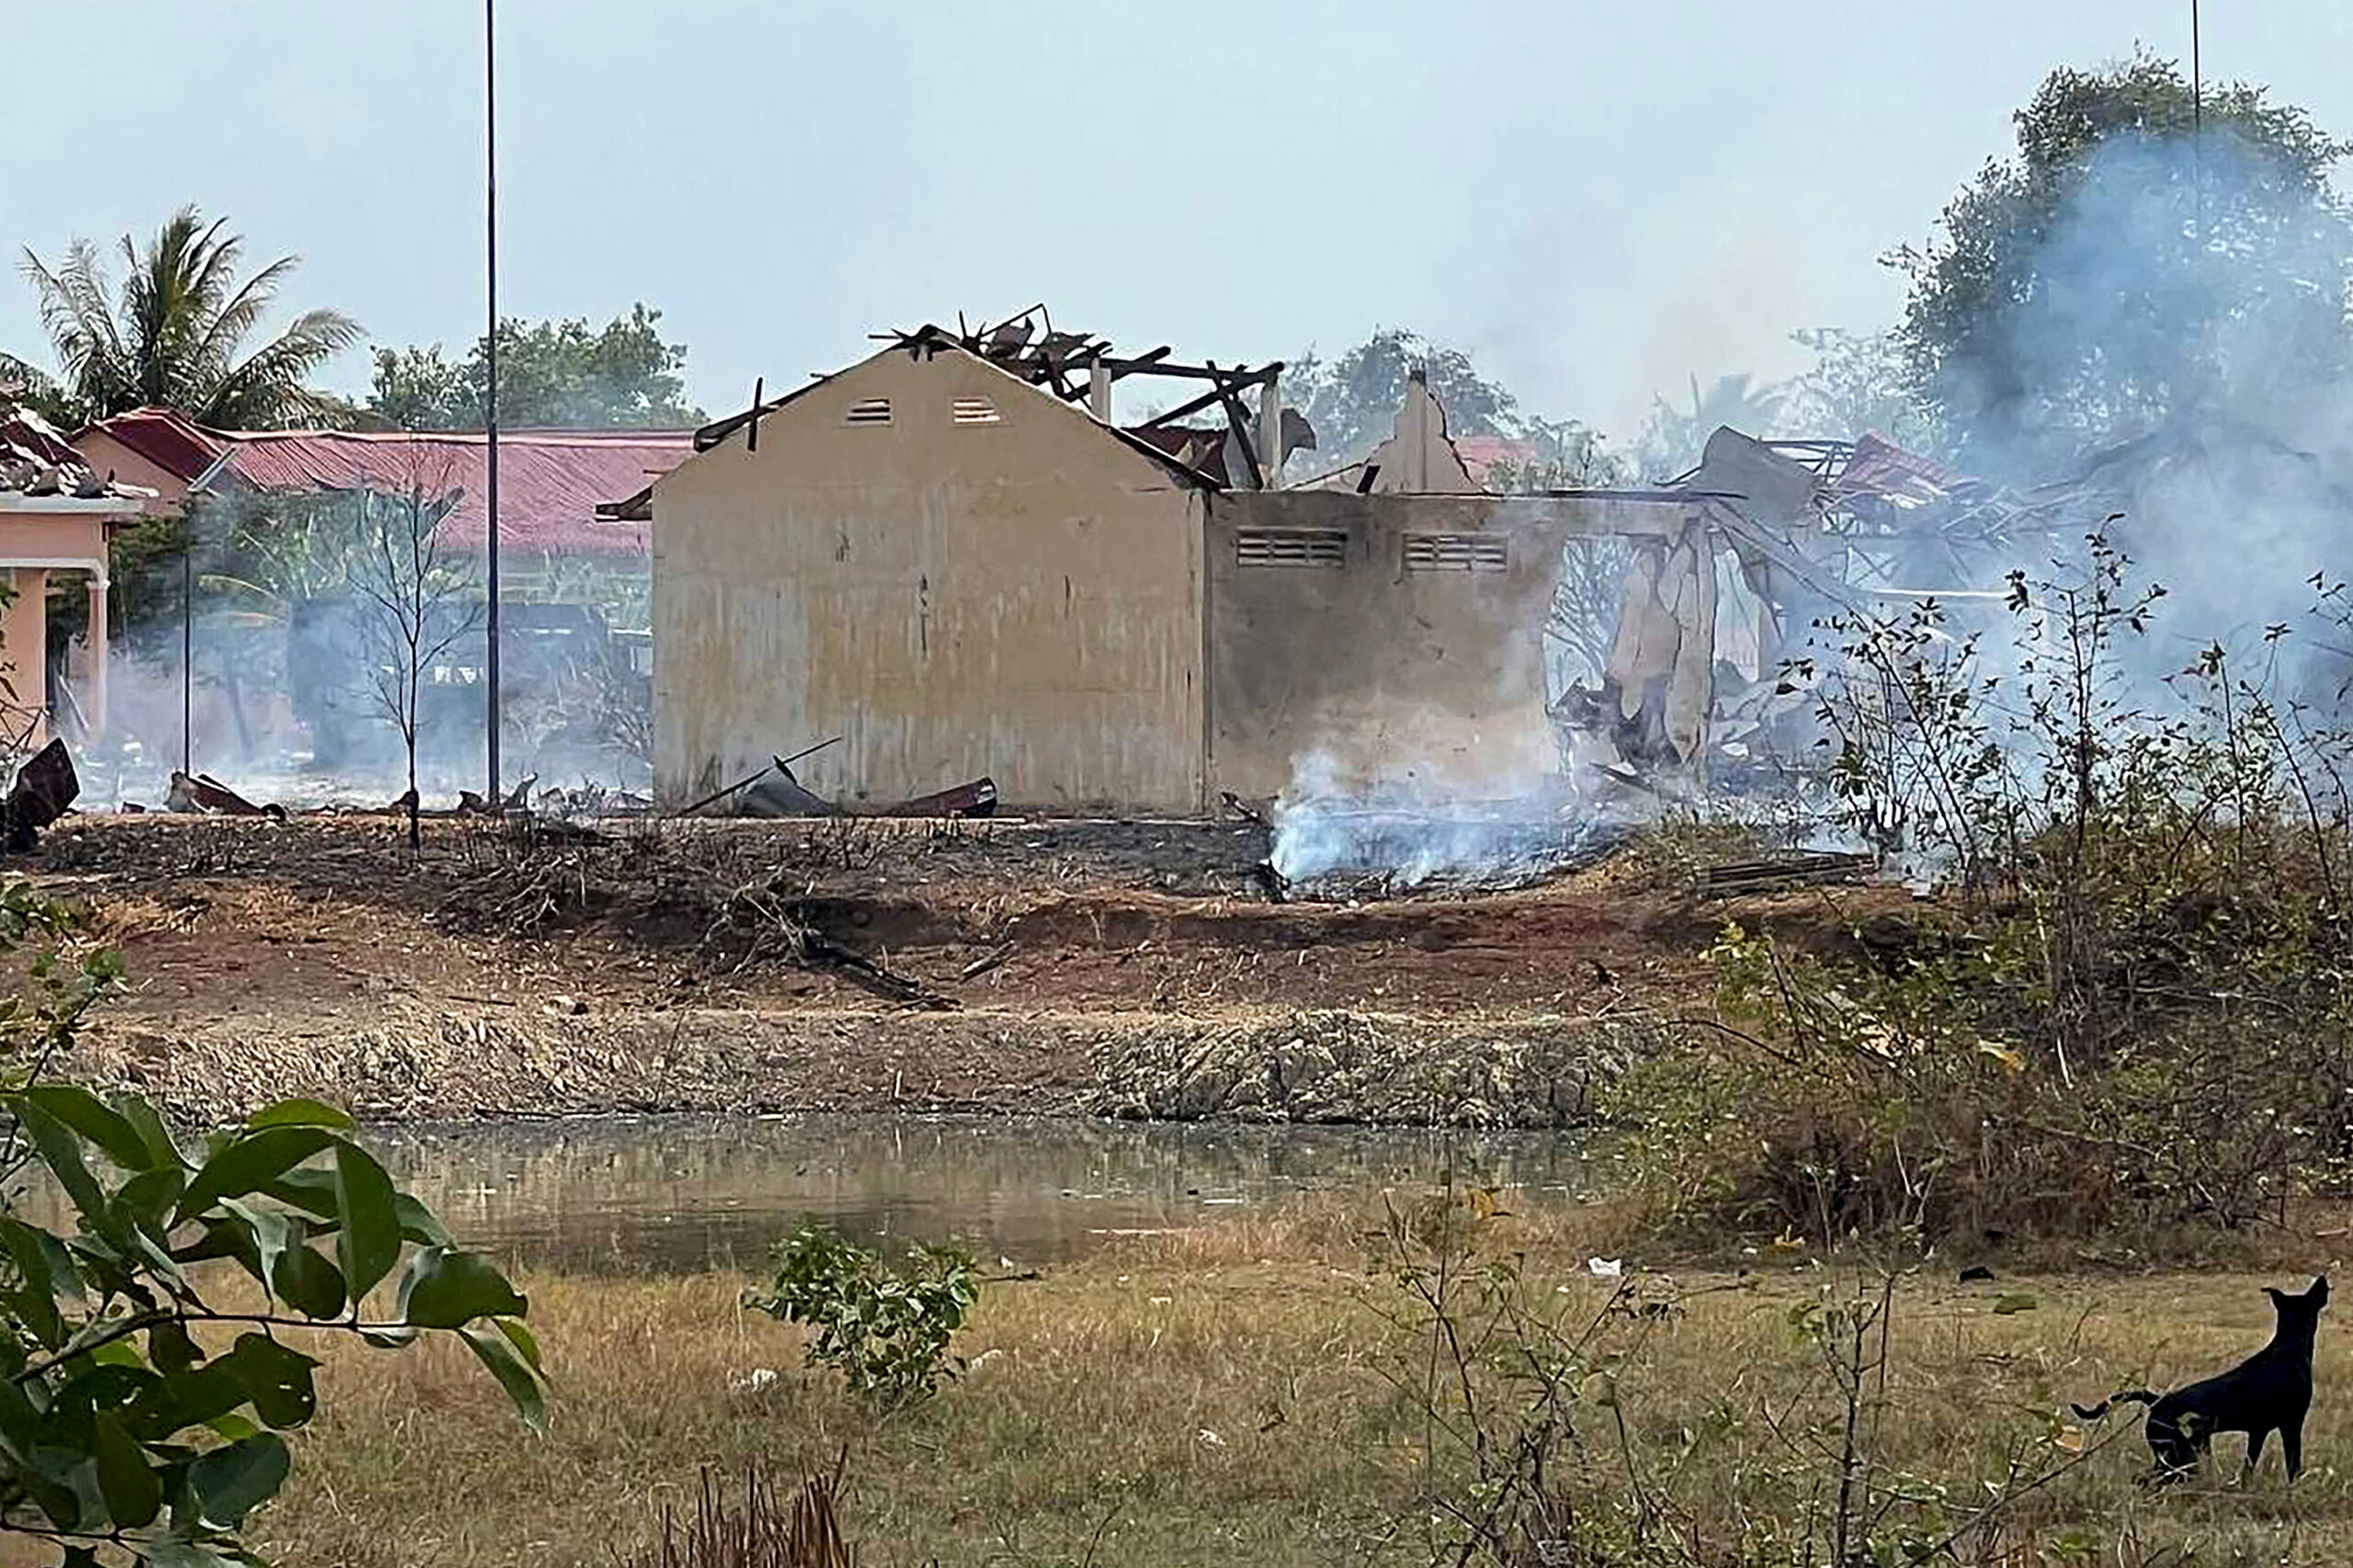 Cambodia: Explosion in Army Warehouse Kills 20 Soldiers